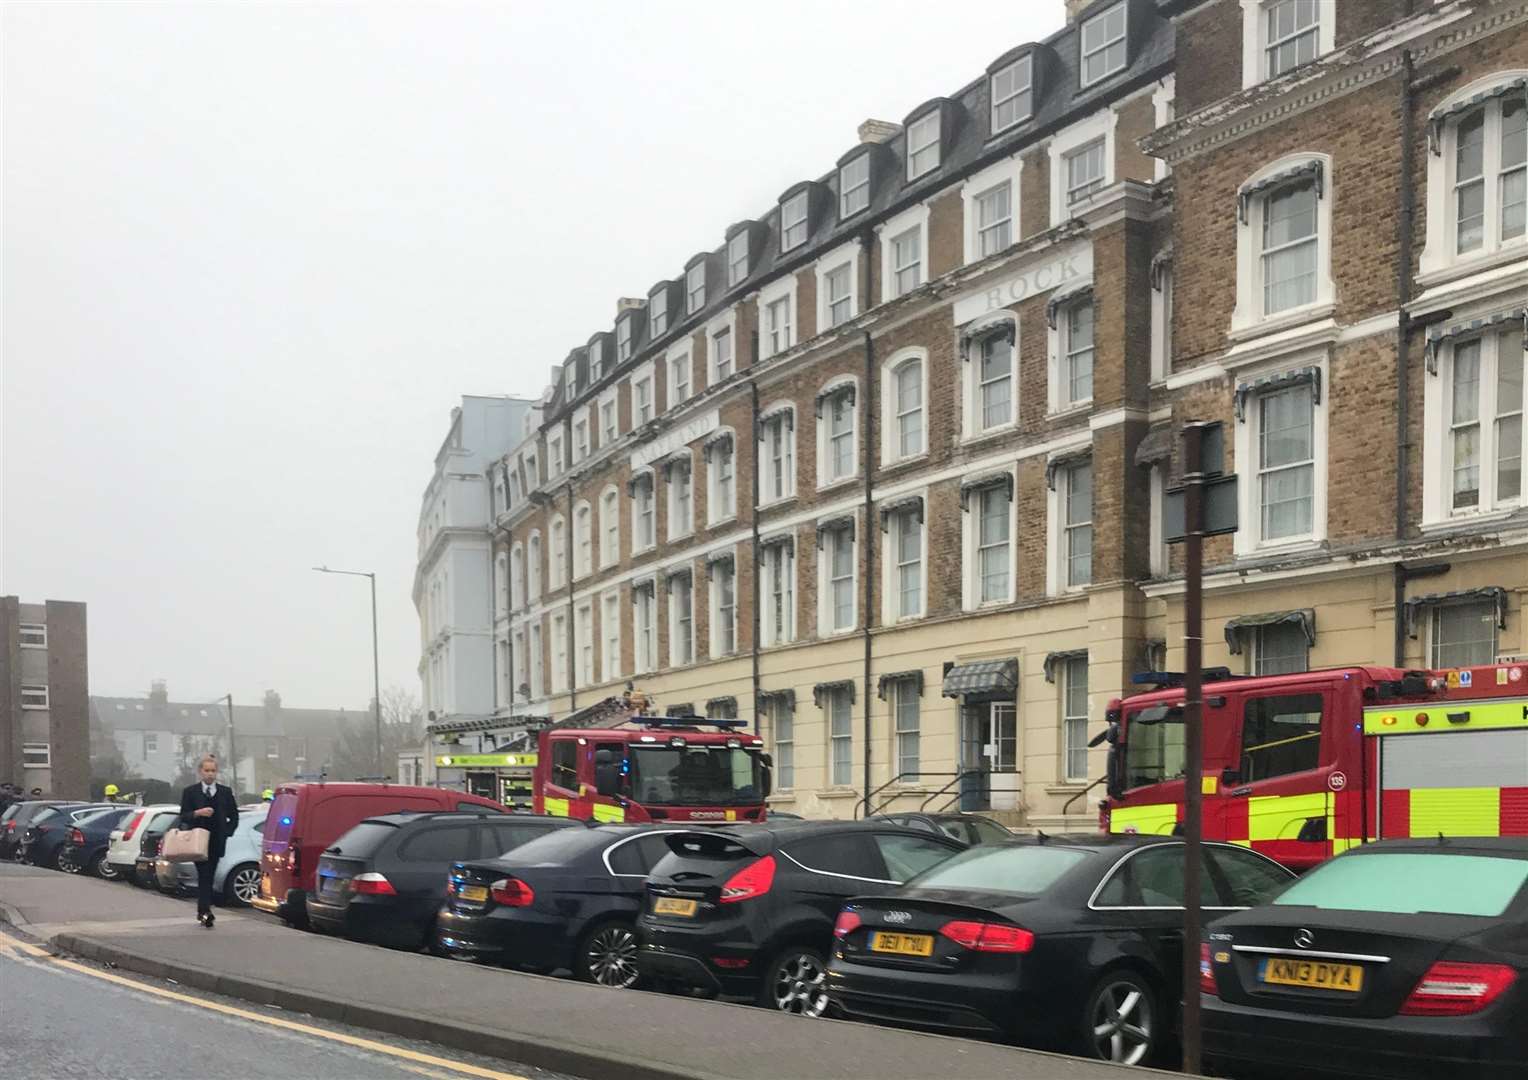 There is a fire on the third floor